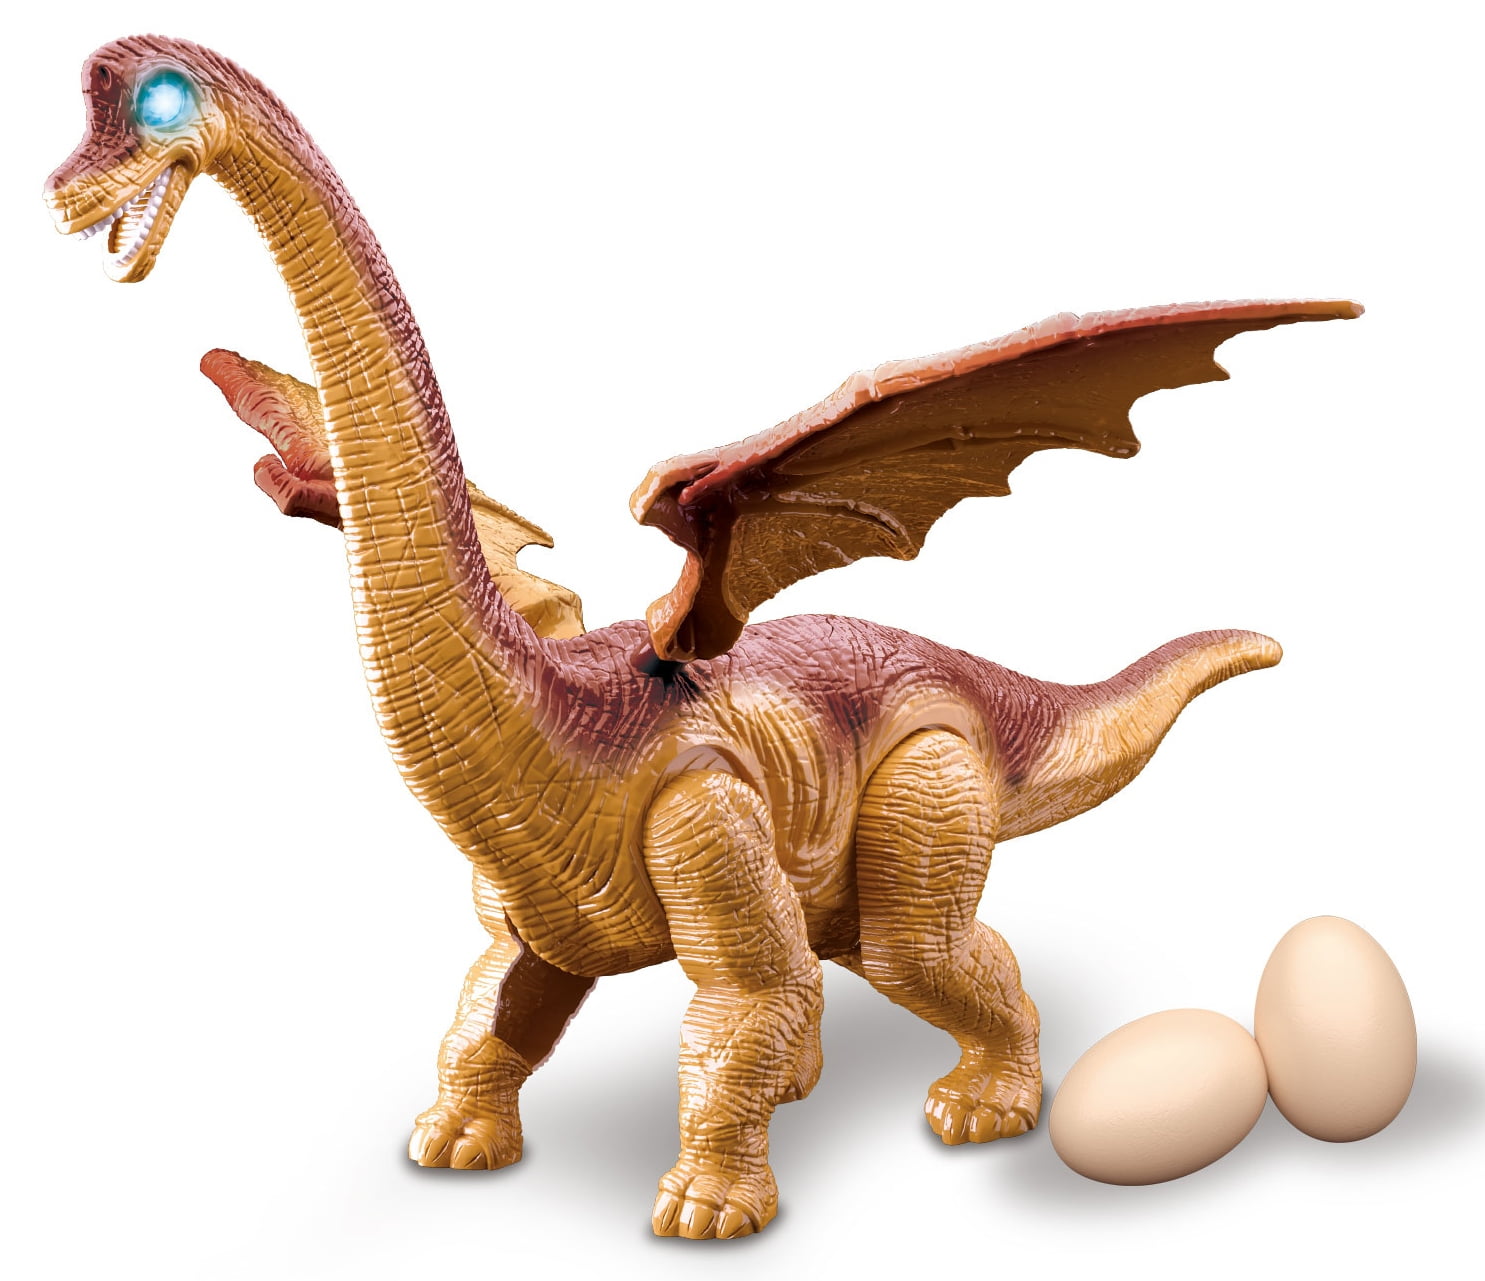 Prank Pterodactyl For Hatching Dinosaur Eggs Lucky Box Stress Relieving Toy  Triceratops Novel Toy Prank Practical Joke - AliExpress